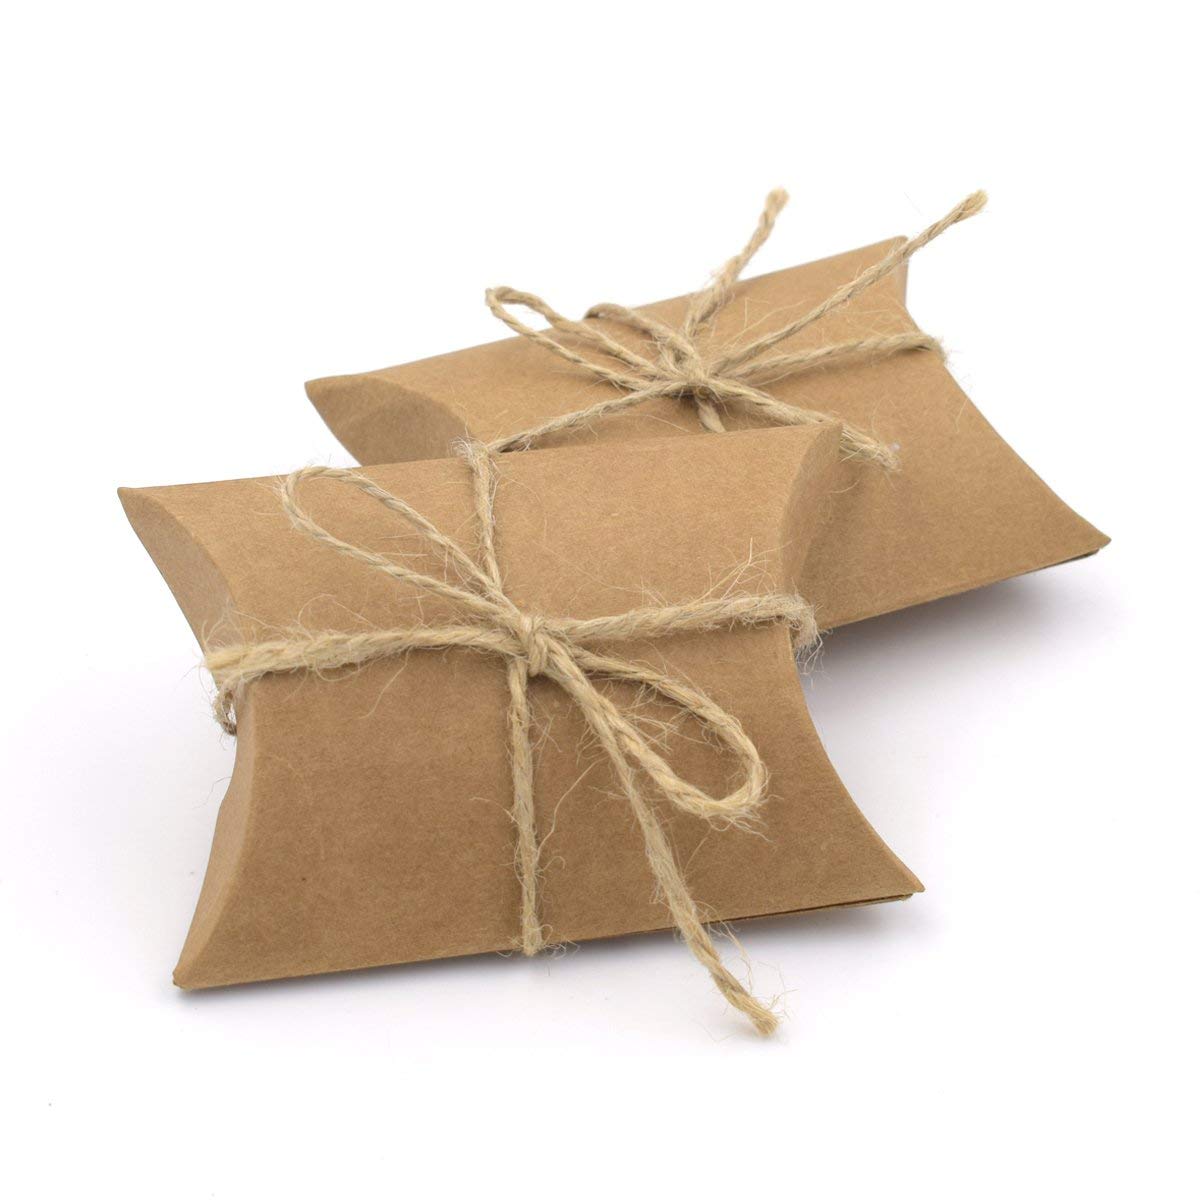 Why Kraft Pillow Boxes Are More in Demand?